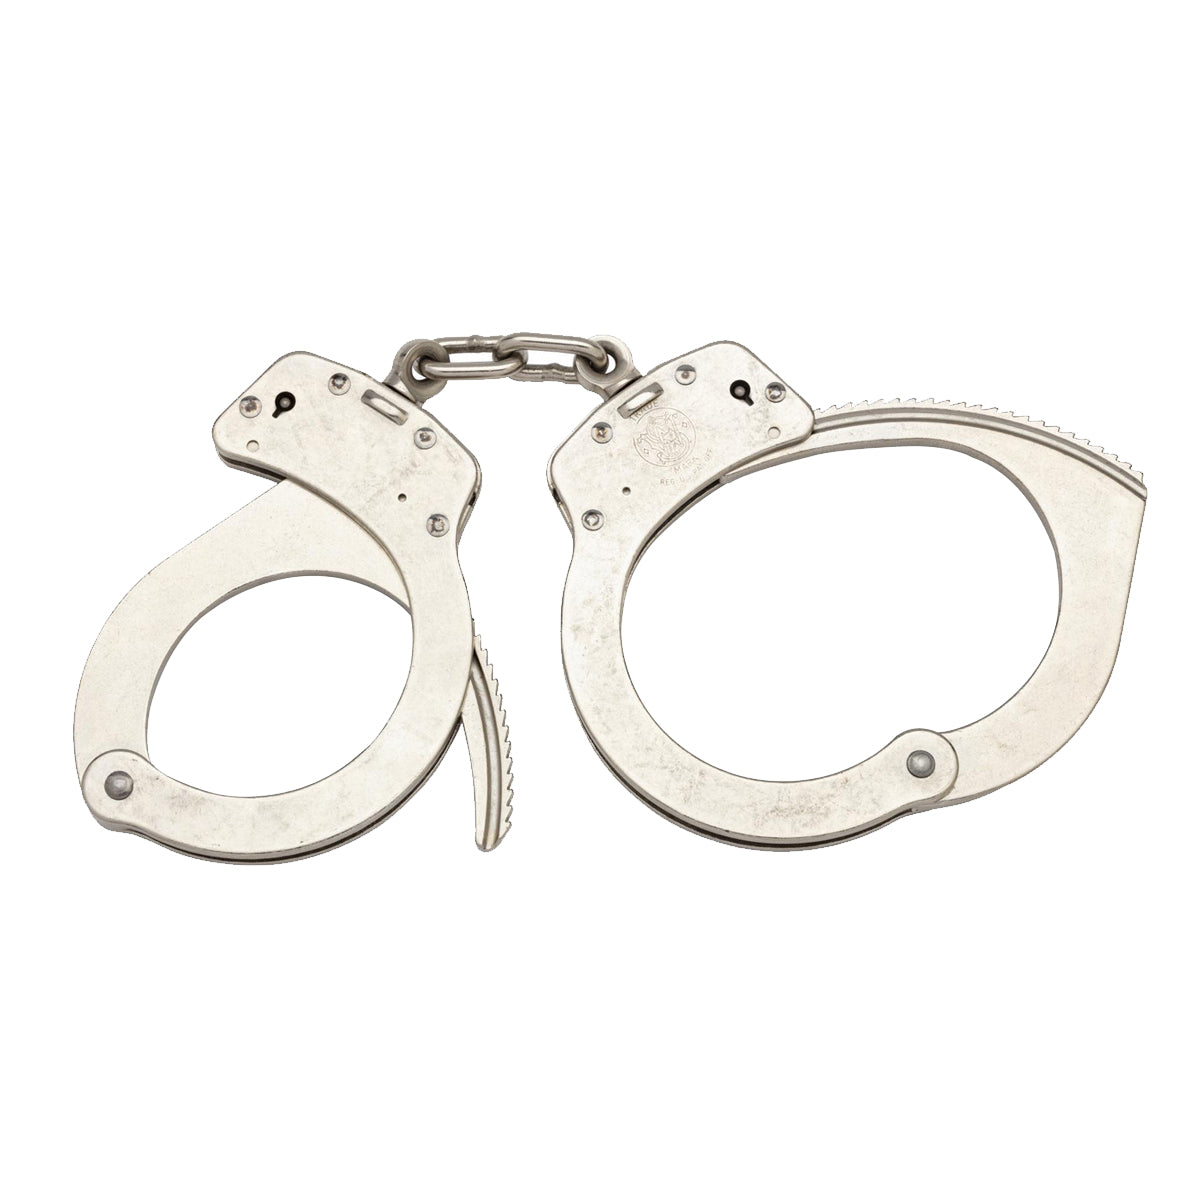 Smith & Wesson Model 1 Chain-Linked Universal Handcuffs